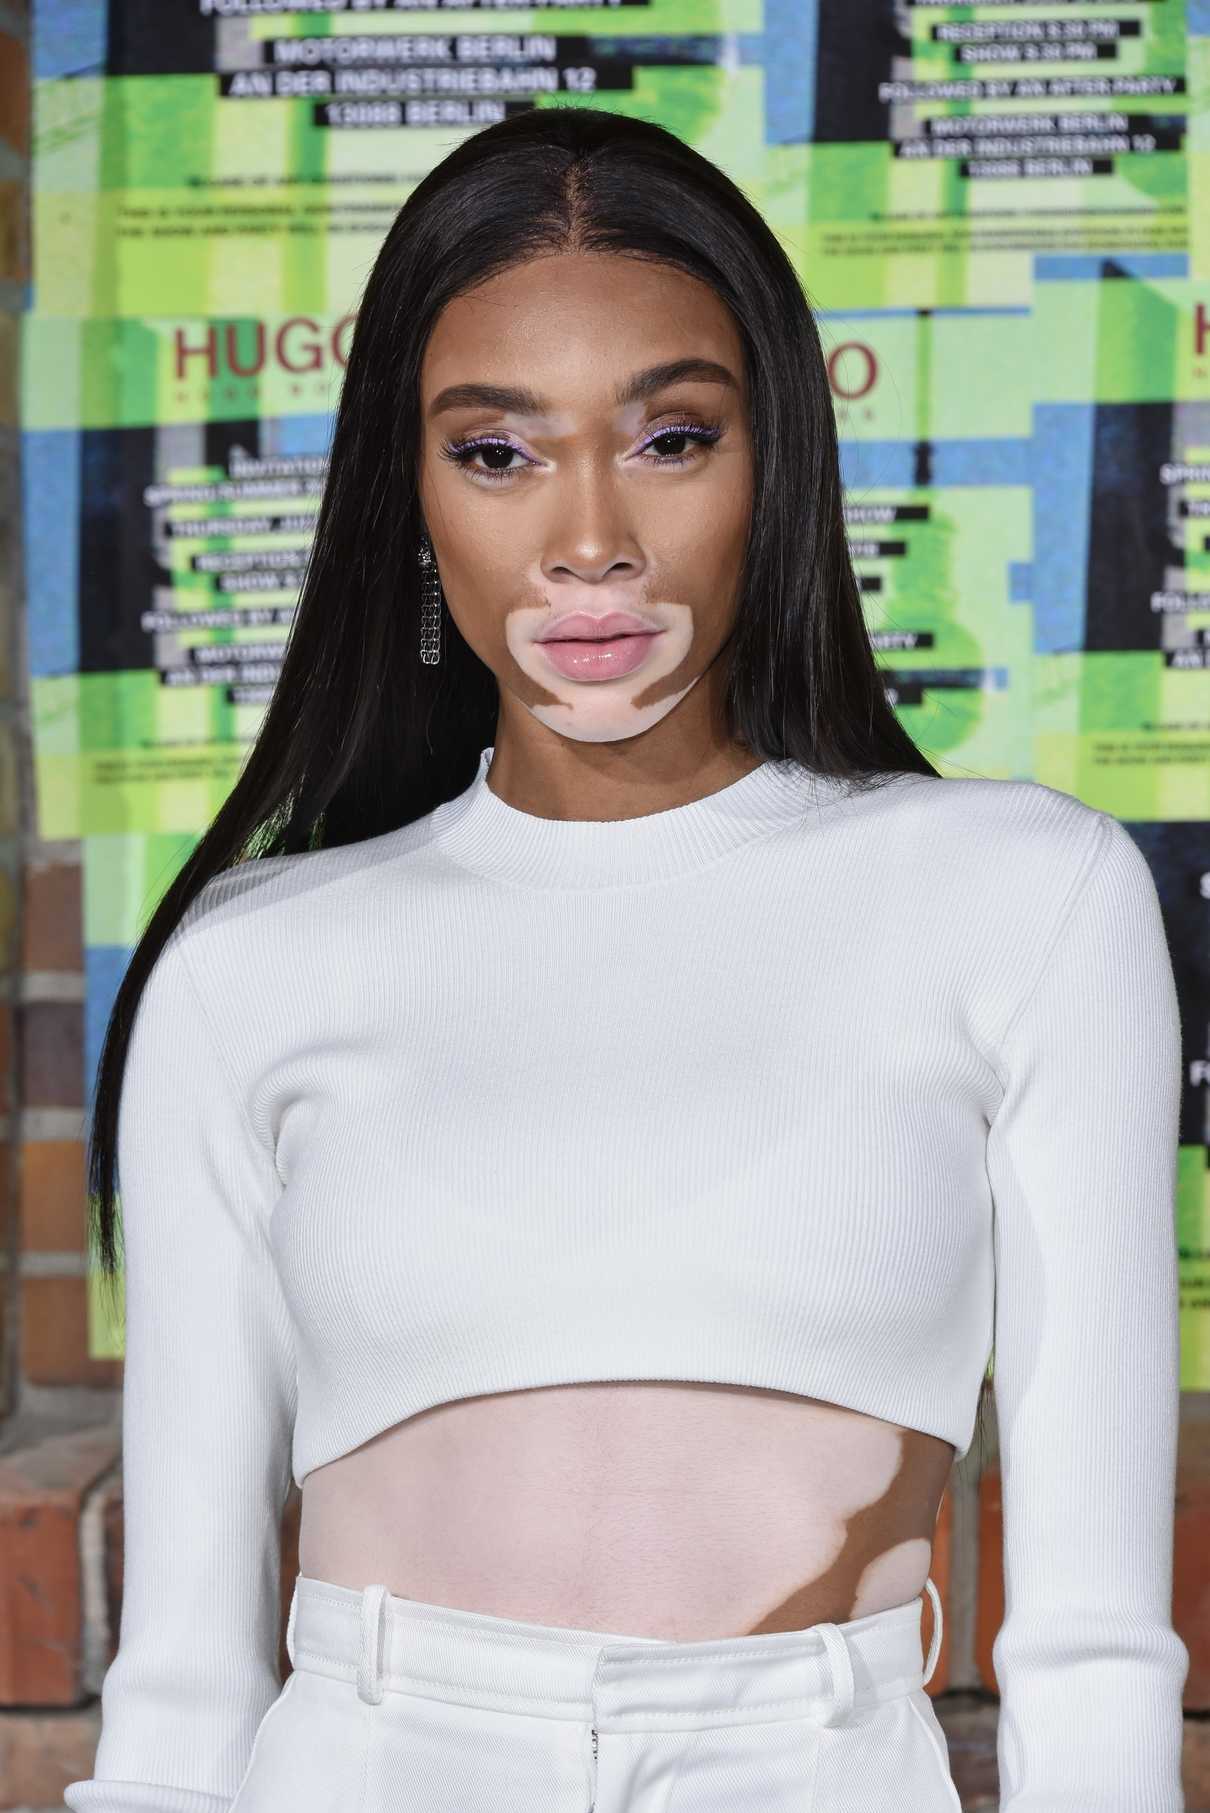 Winnie Harlow Attends the Hugo Boss Show During the Mercedes-Benz Fashion Week in Berlin 07/05/2018-5